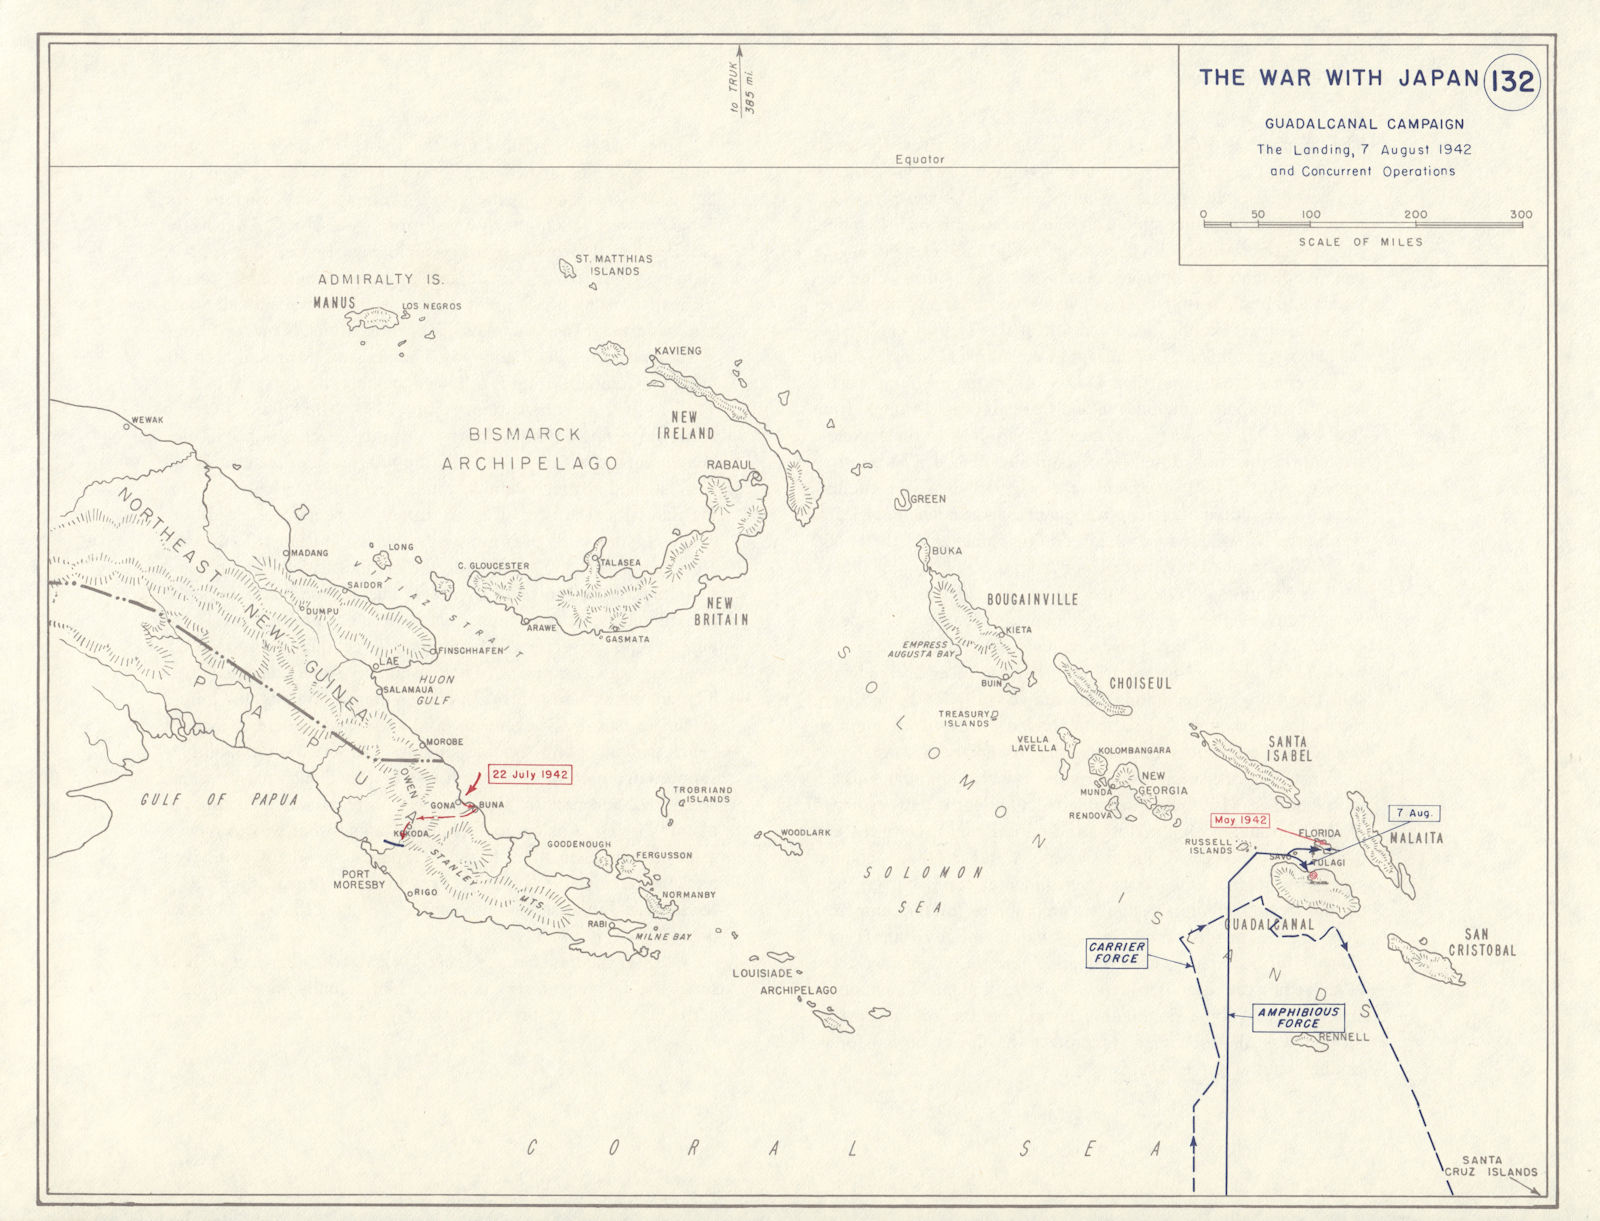 World War 2. Guadalcanal Campaign. Landing 7 Aug 1942 & Concurrent Ops 1959 map